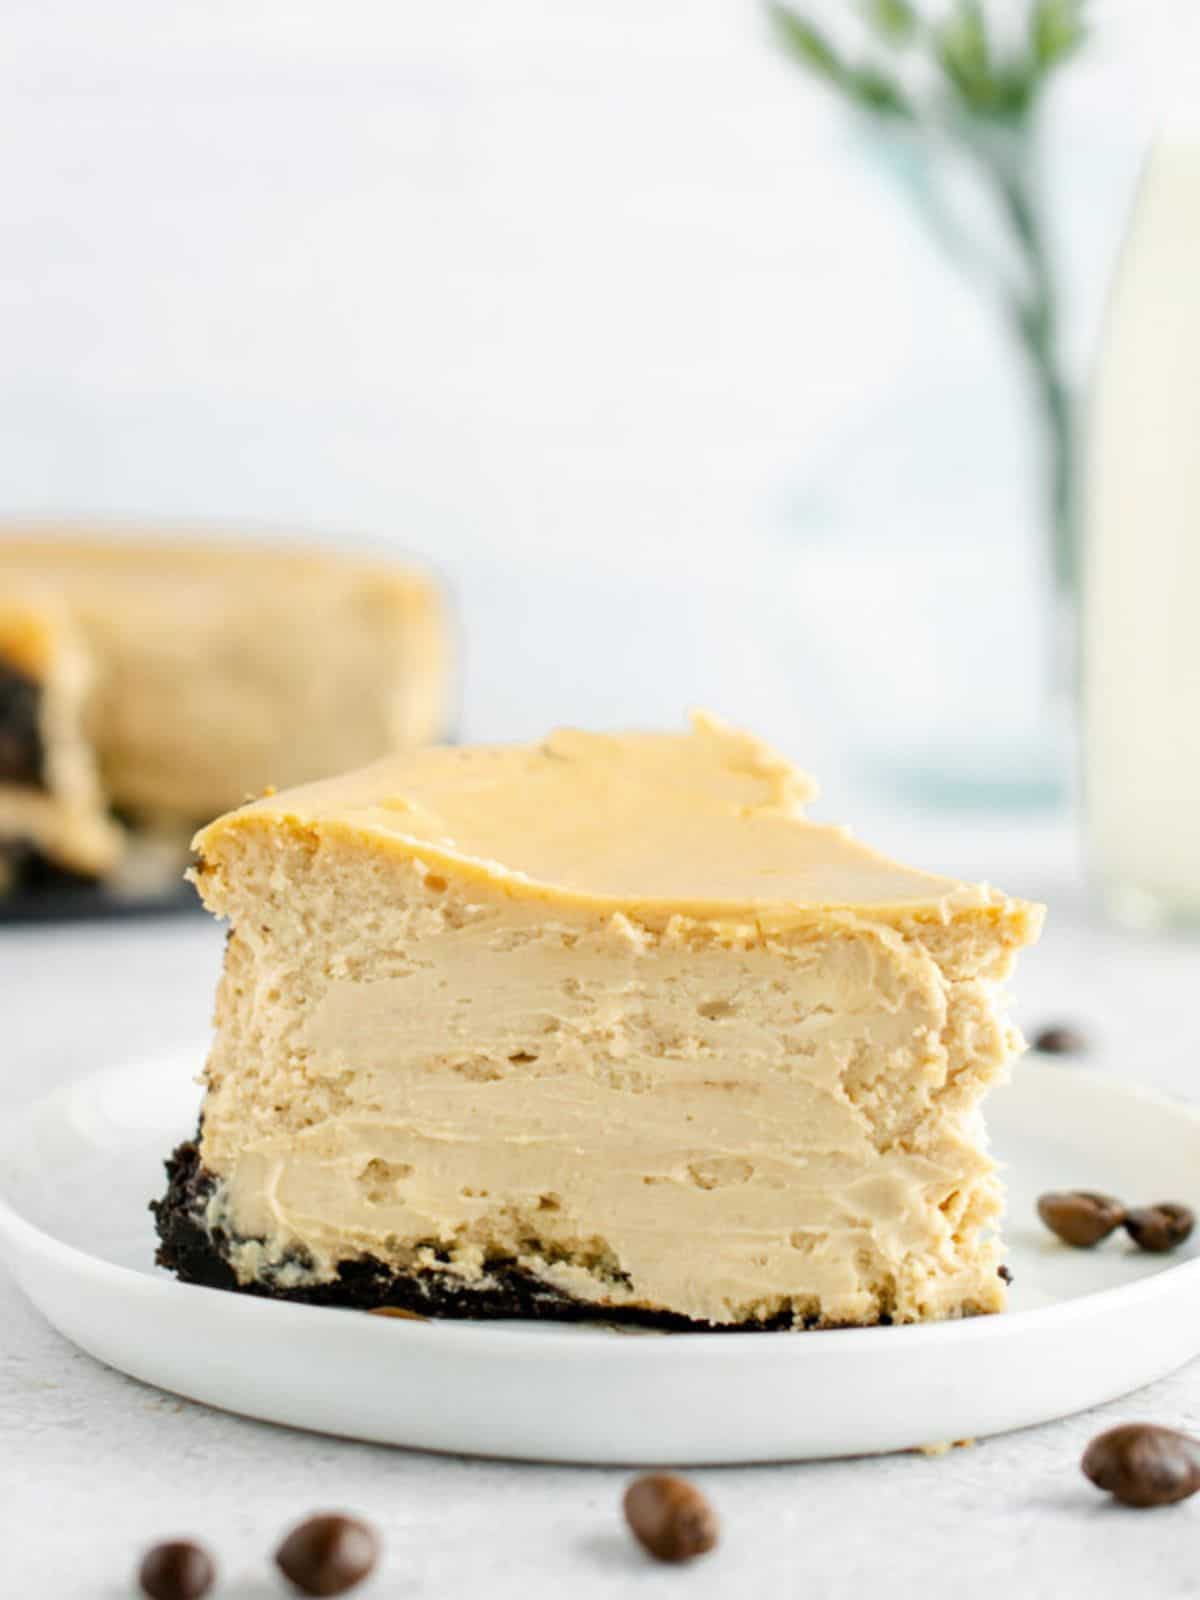 coffee cheesecake made with rich and aromatic fragrance of coffee-infused cheesecake filling, and oreo cookie crust.